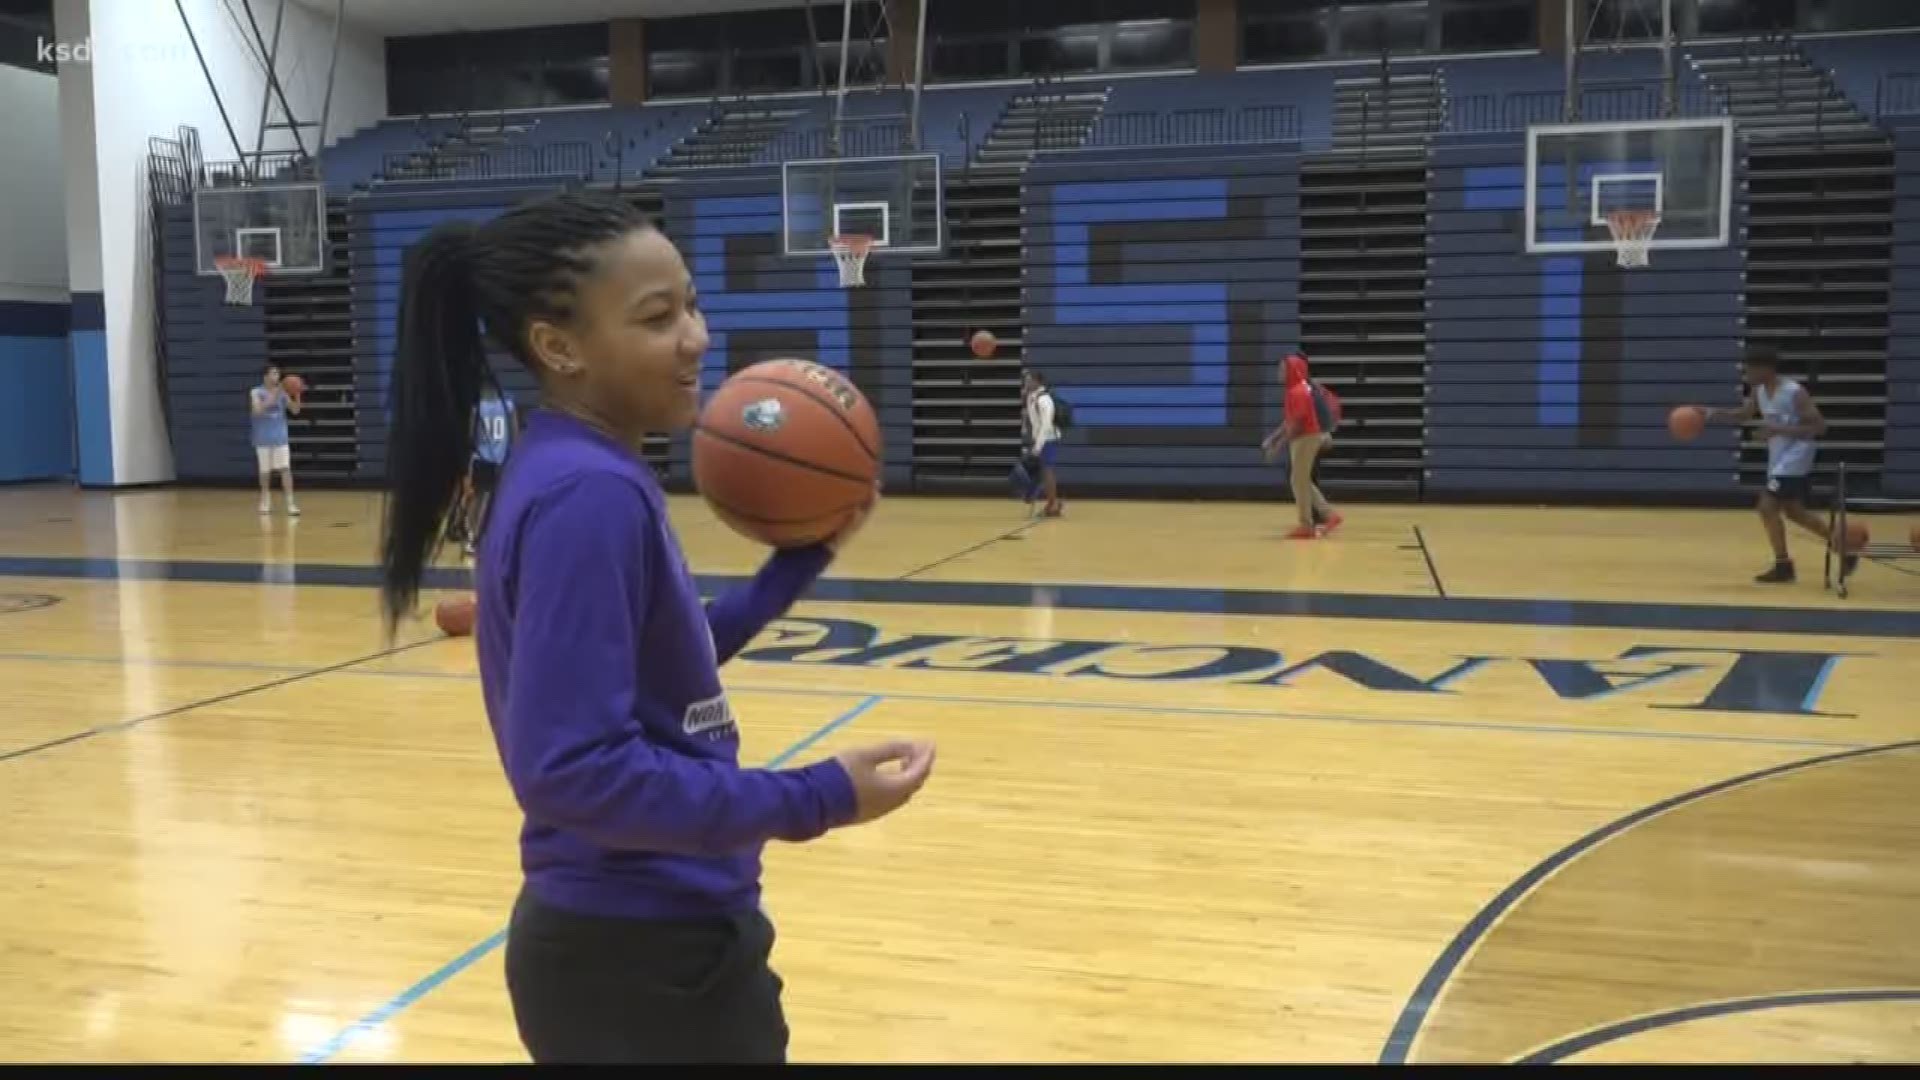 Kaylah Rainey was told her senior season was over before it even started when she was diagnosed with a life-threatening heart condition. Following surgery, she's surprised everyone with a tremendous comeback.